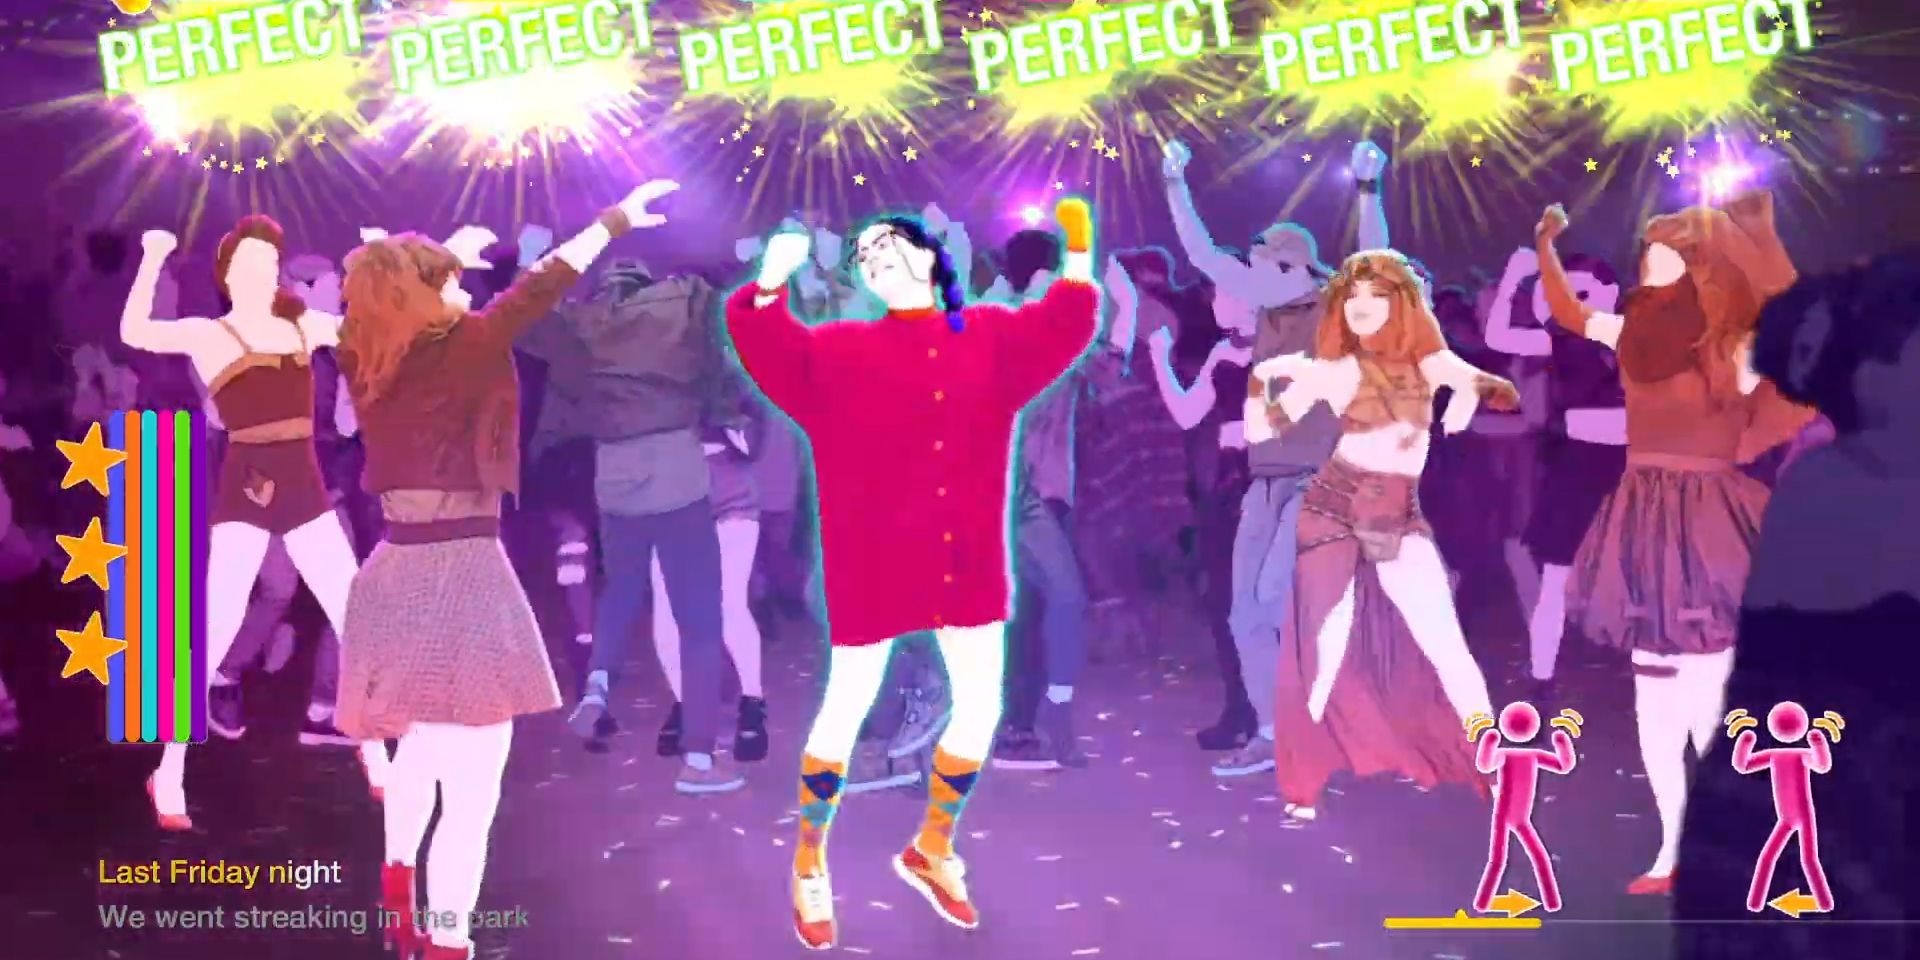 Just Dance 2022 avatars dancing with perfect message